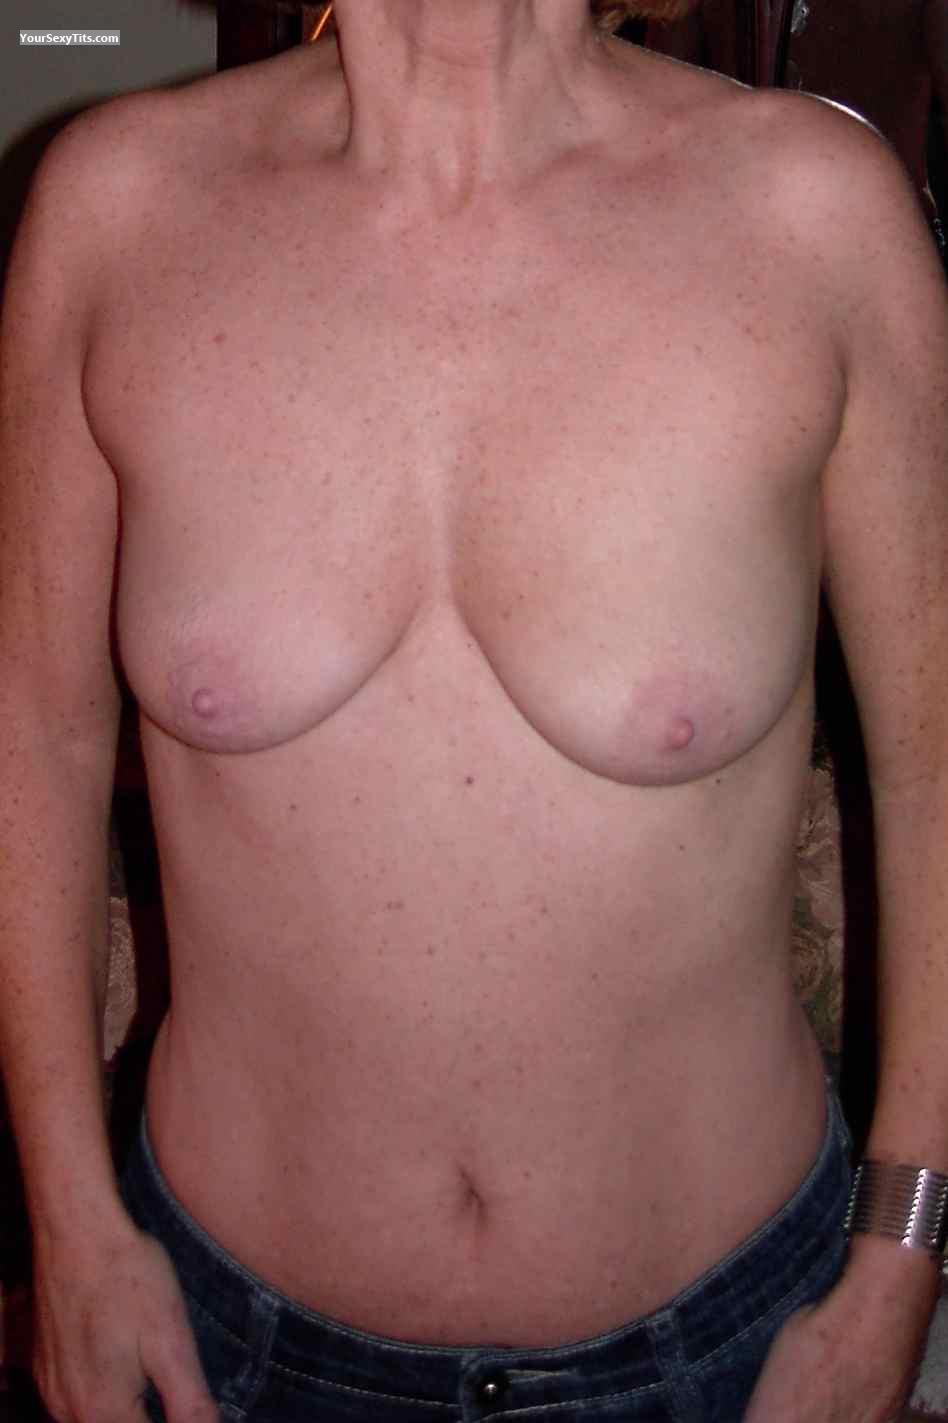 Tit Flash: Small Tits - Pale Nipples from Canada